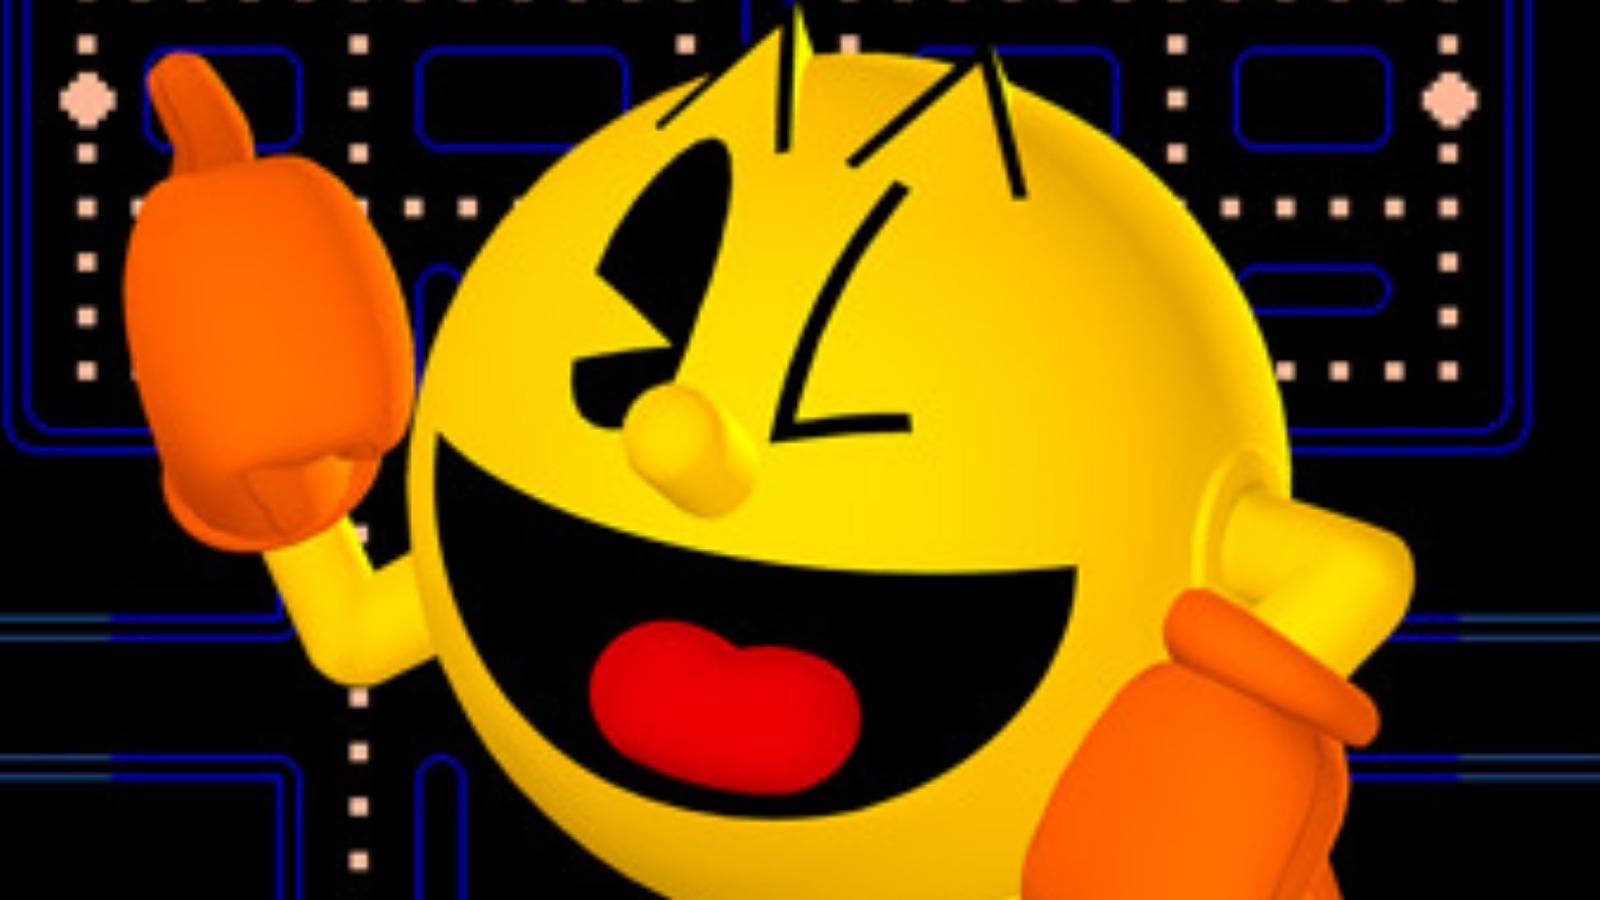 yellow pacman ghost